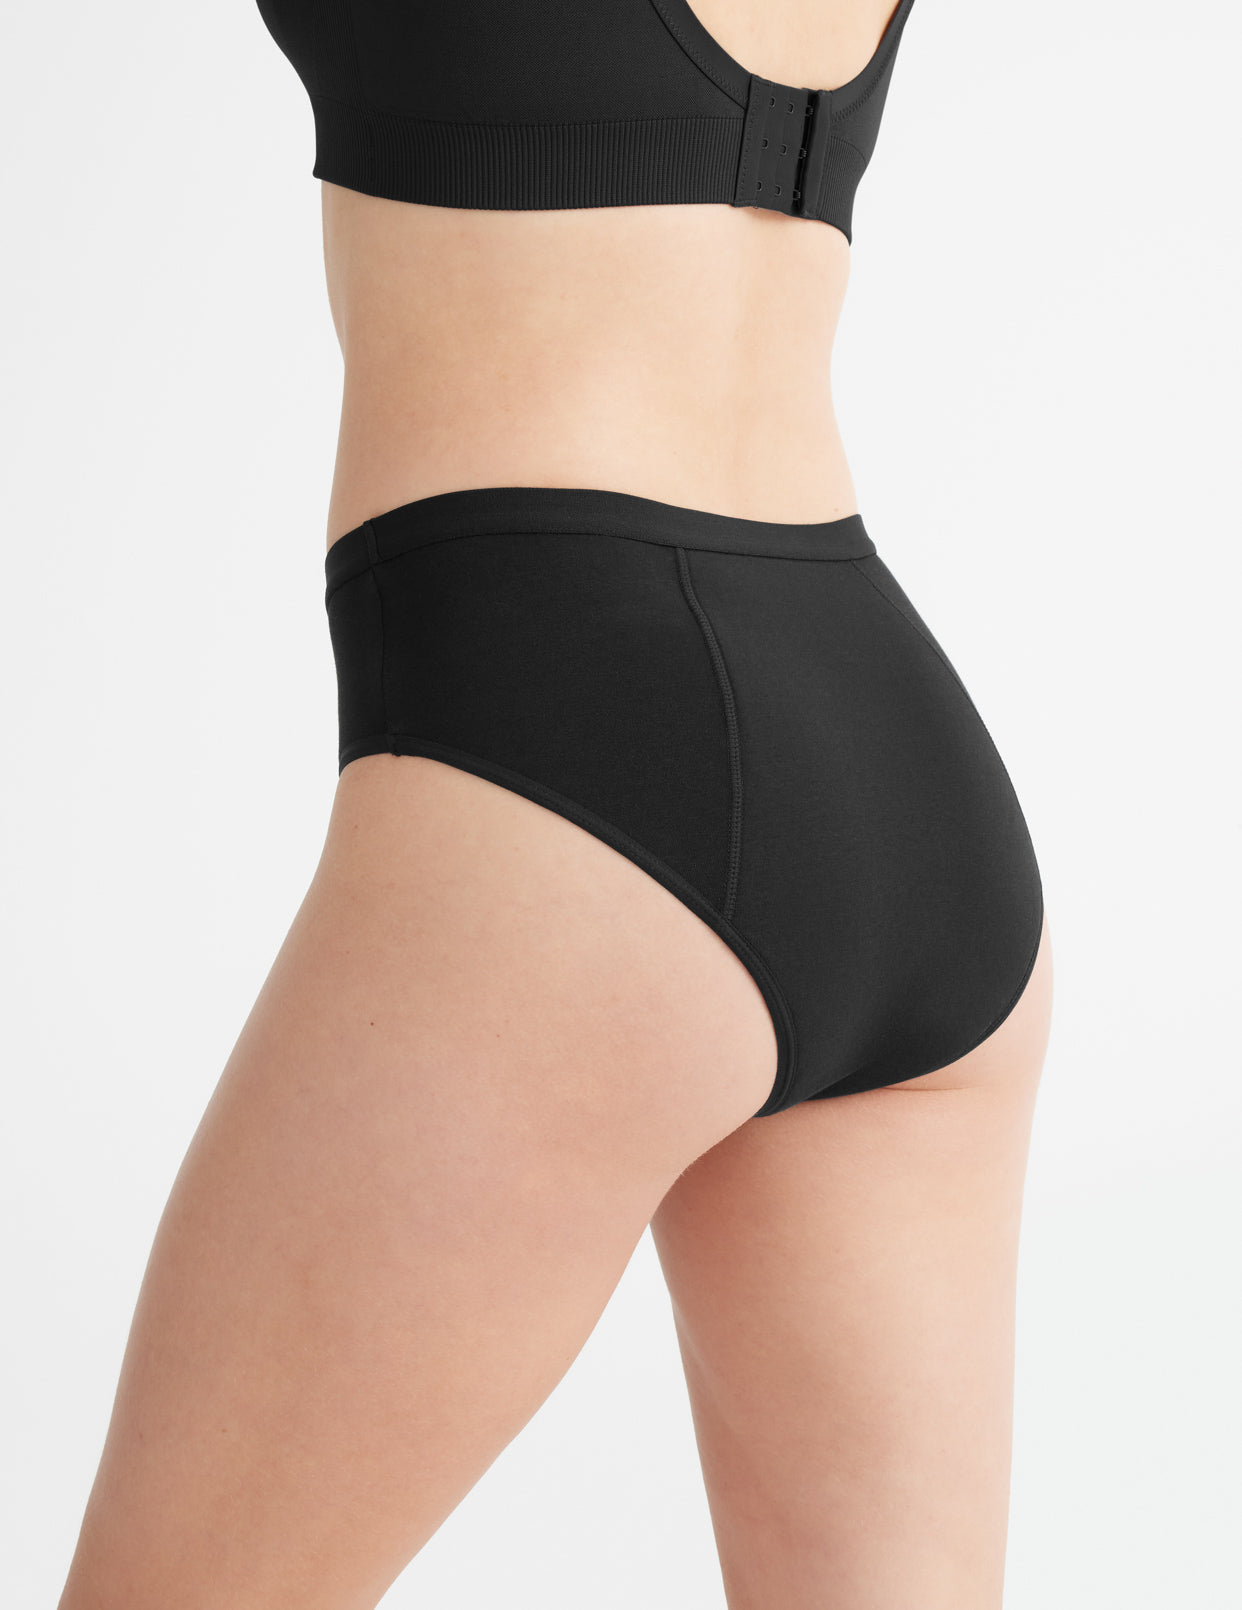 Kt by Knix - Introducing Cotton Modal Super Leakproof Underwear